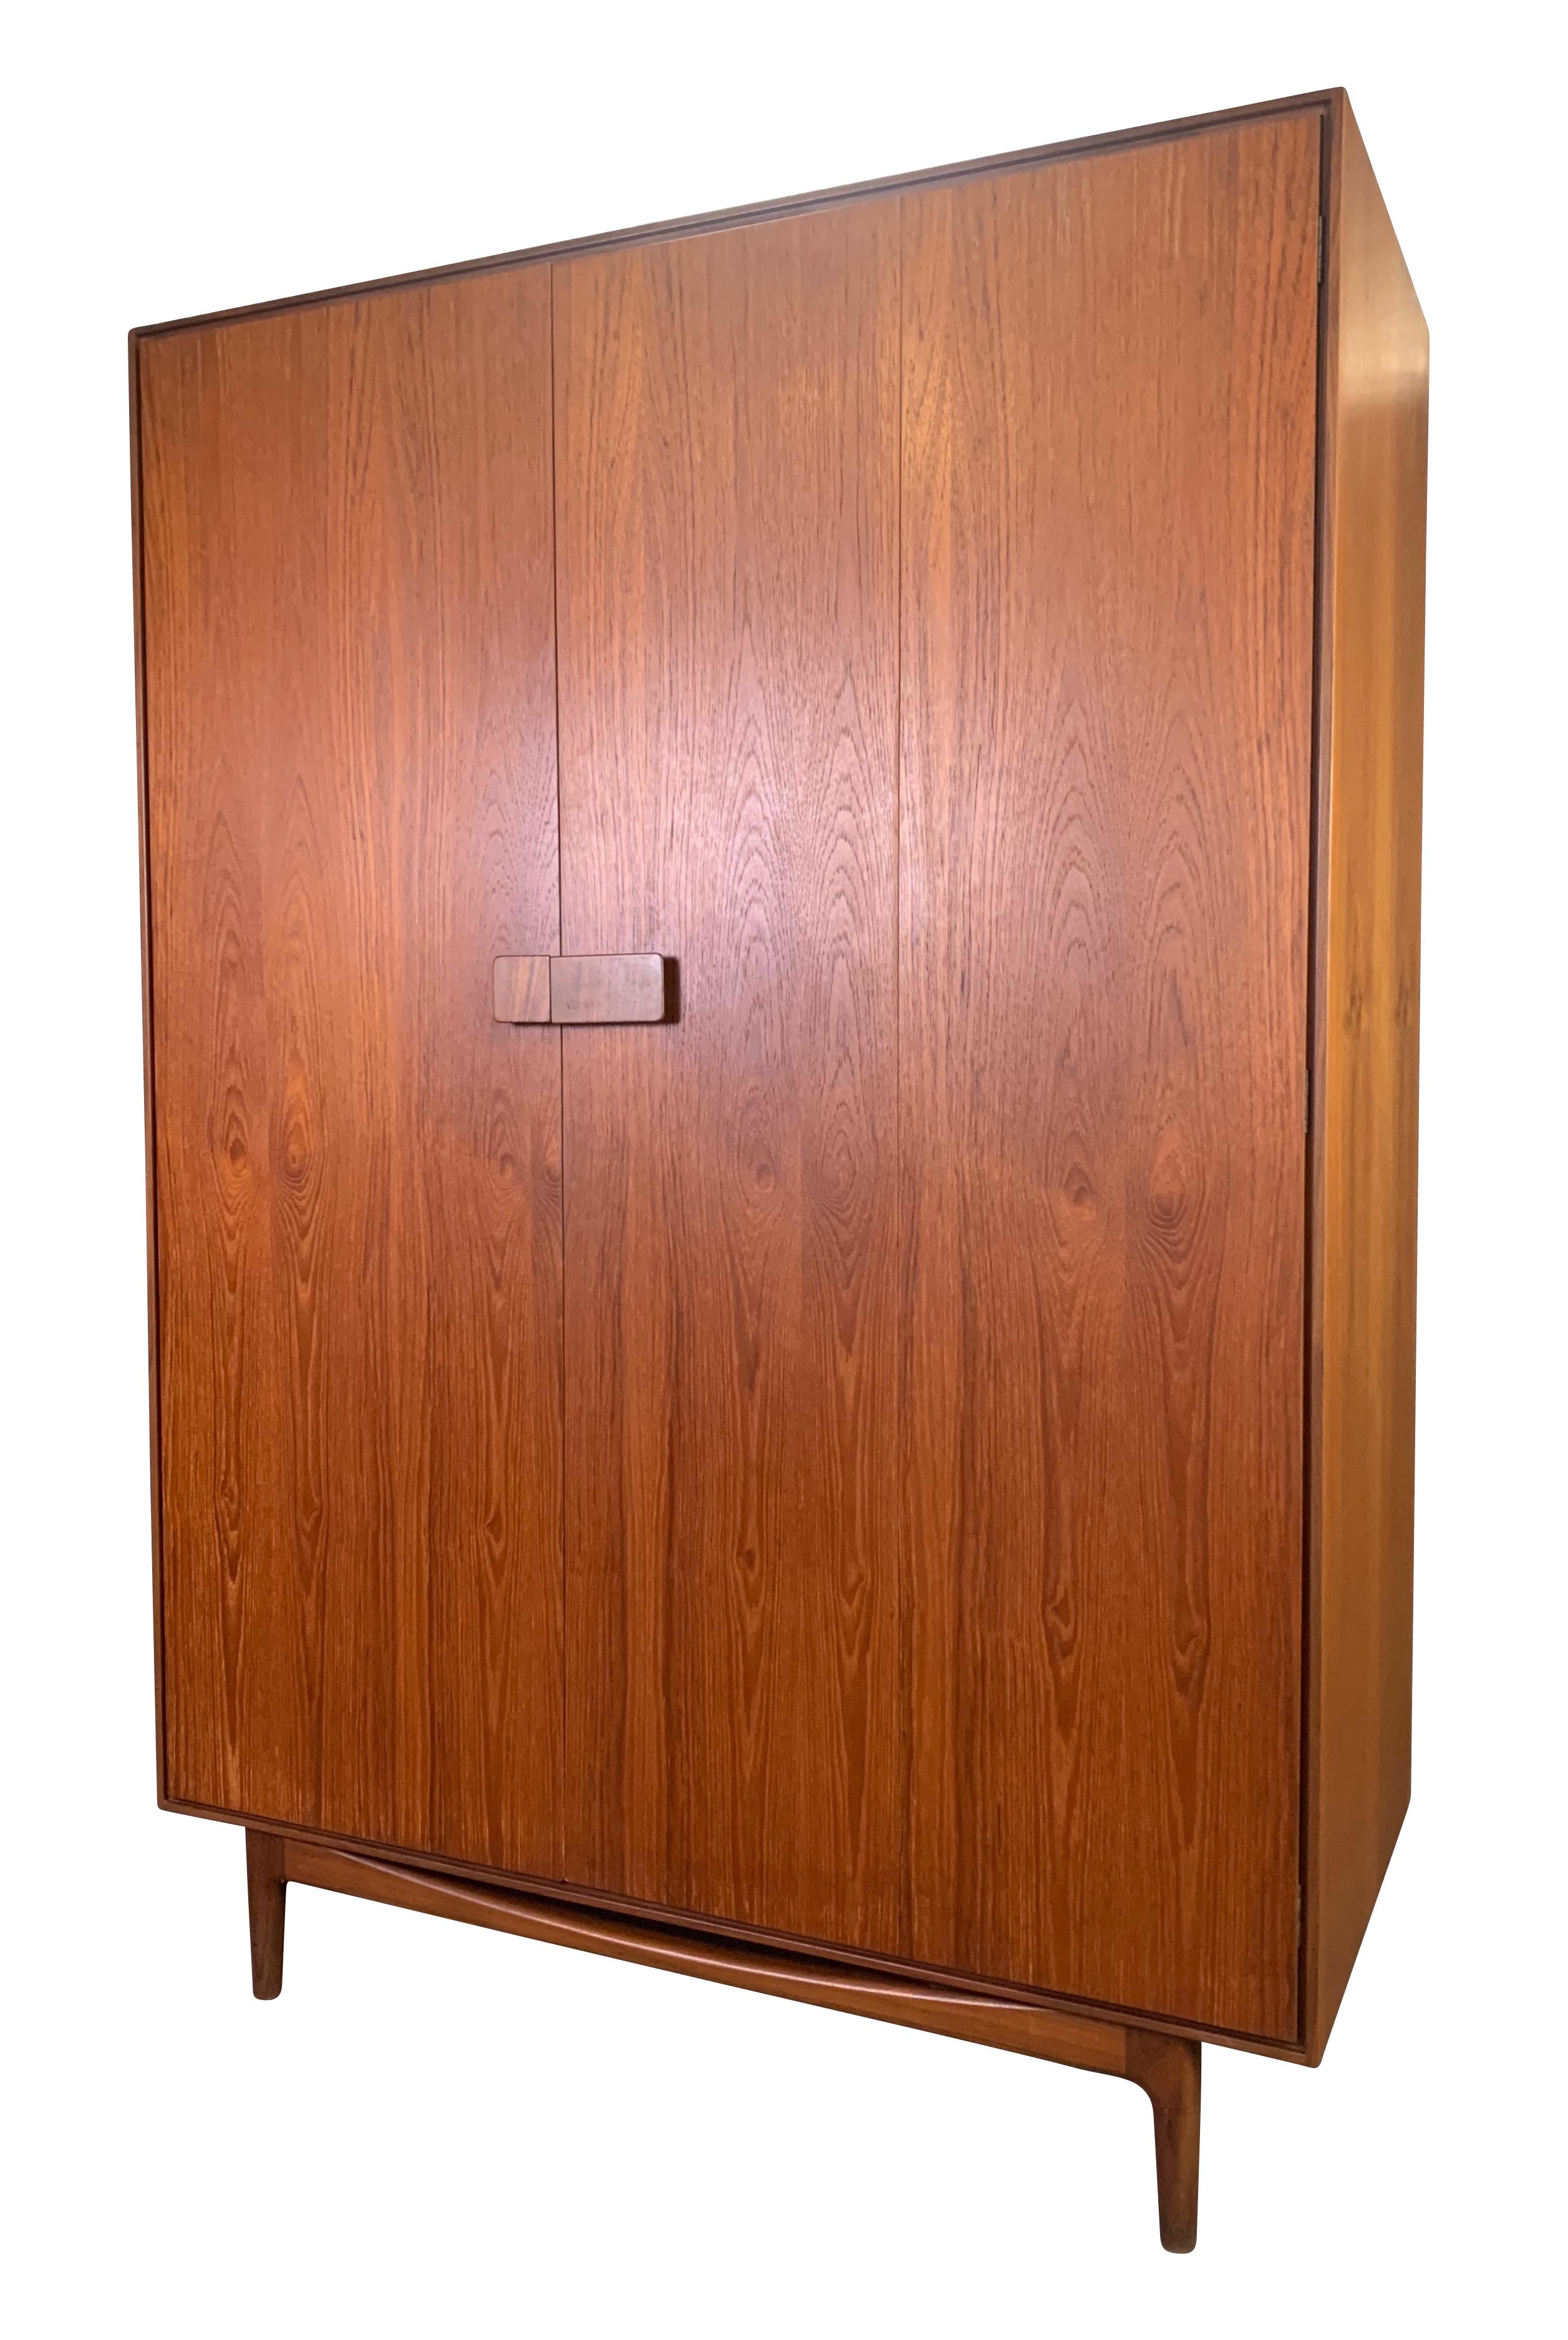 Here is a rare and large armoire in teak wood designed by master Scandinavian designer Ib Kofod Larsen for G Plan manufactured in England in the 1960s.
This British wardrobe, recently imported from UK to California, features a vibrant wood grain,